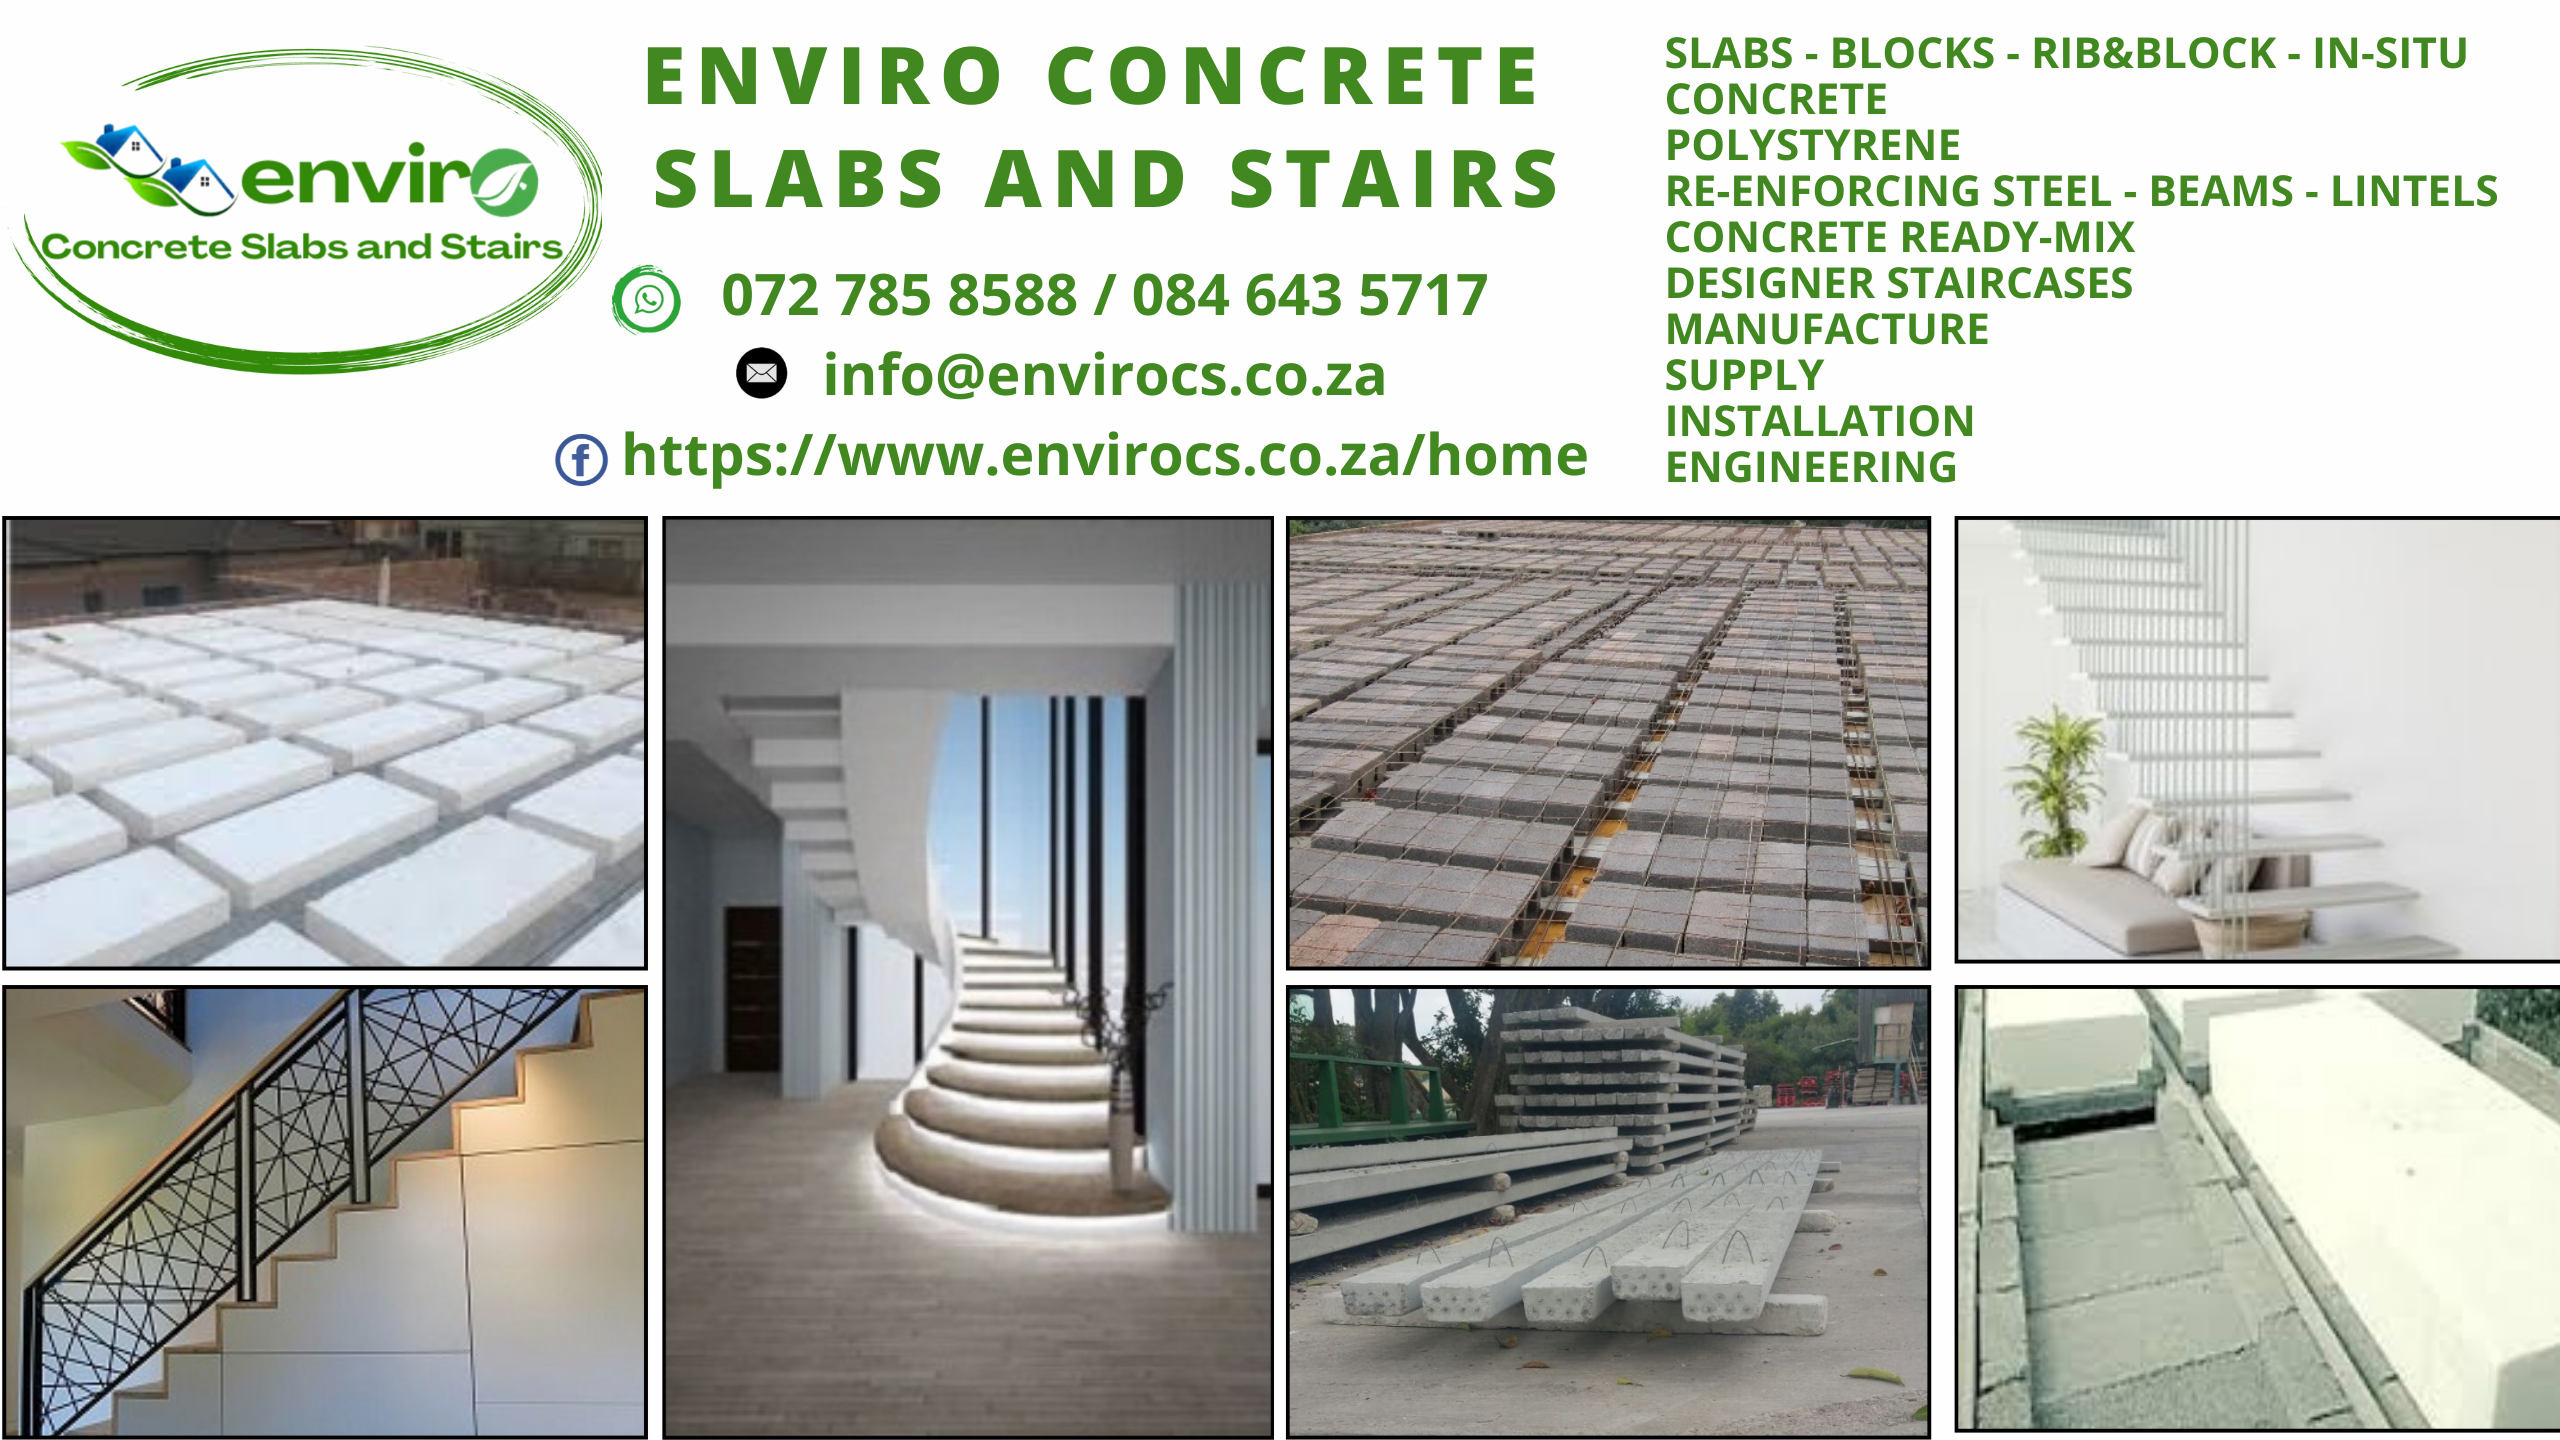 Concrete and Polystyrene Slabs, Reinforcing Steel, Designer Stairs